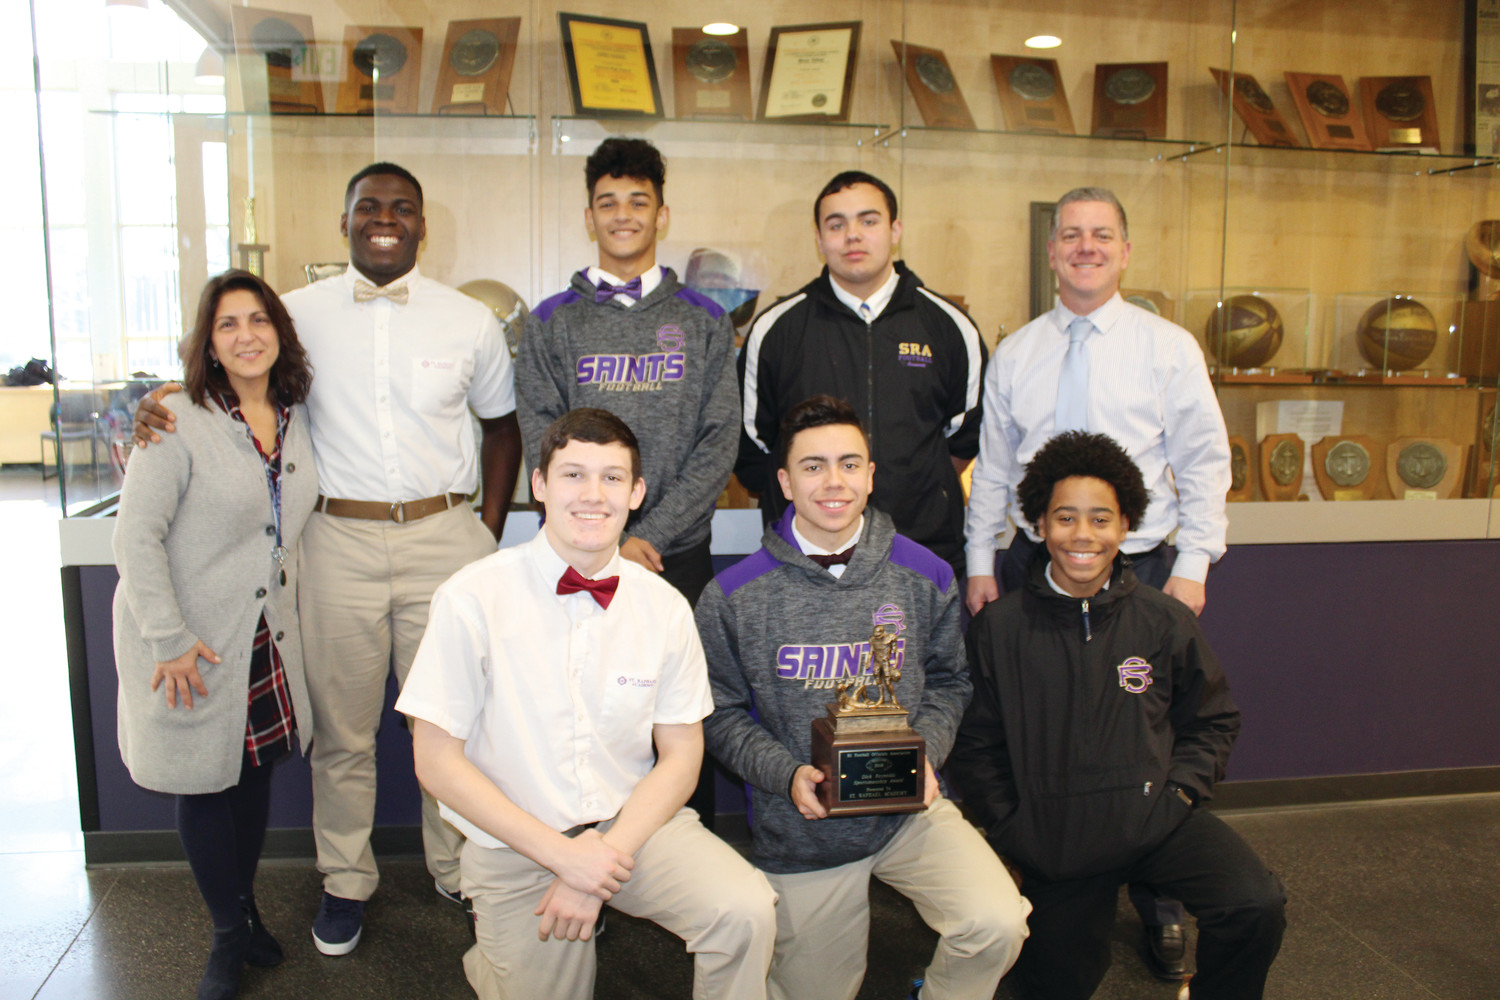 Pictured, top row: Malaina Murphy, SRA guidance counselor and football manager, Albert Guwoe, Andre Gray, Thomas Arsenault, Mike Sassi, SRA math teacher and head coach. Front row: Andrew Andella, Kai Meerbott, Makhi Goncalves.